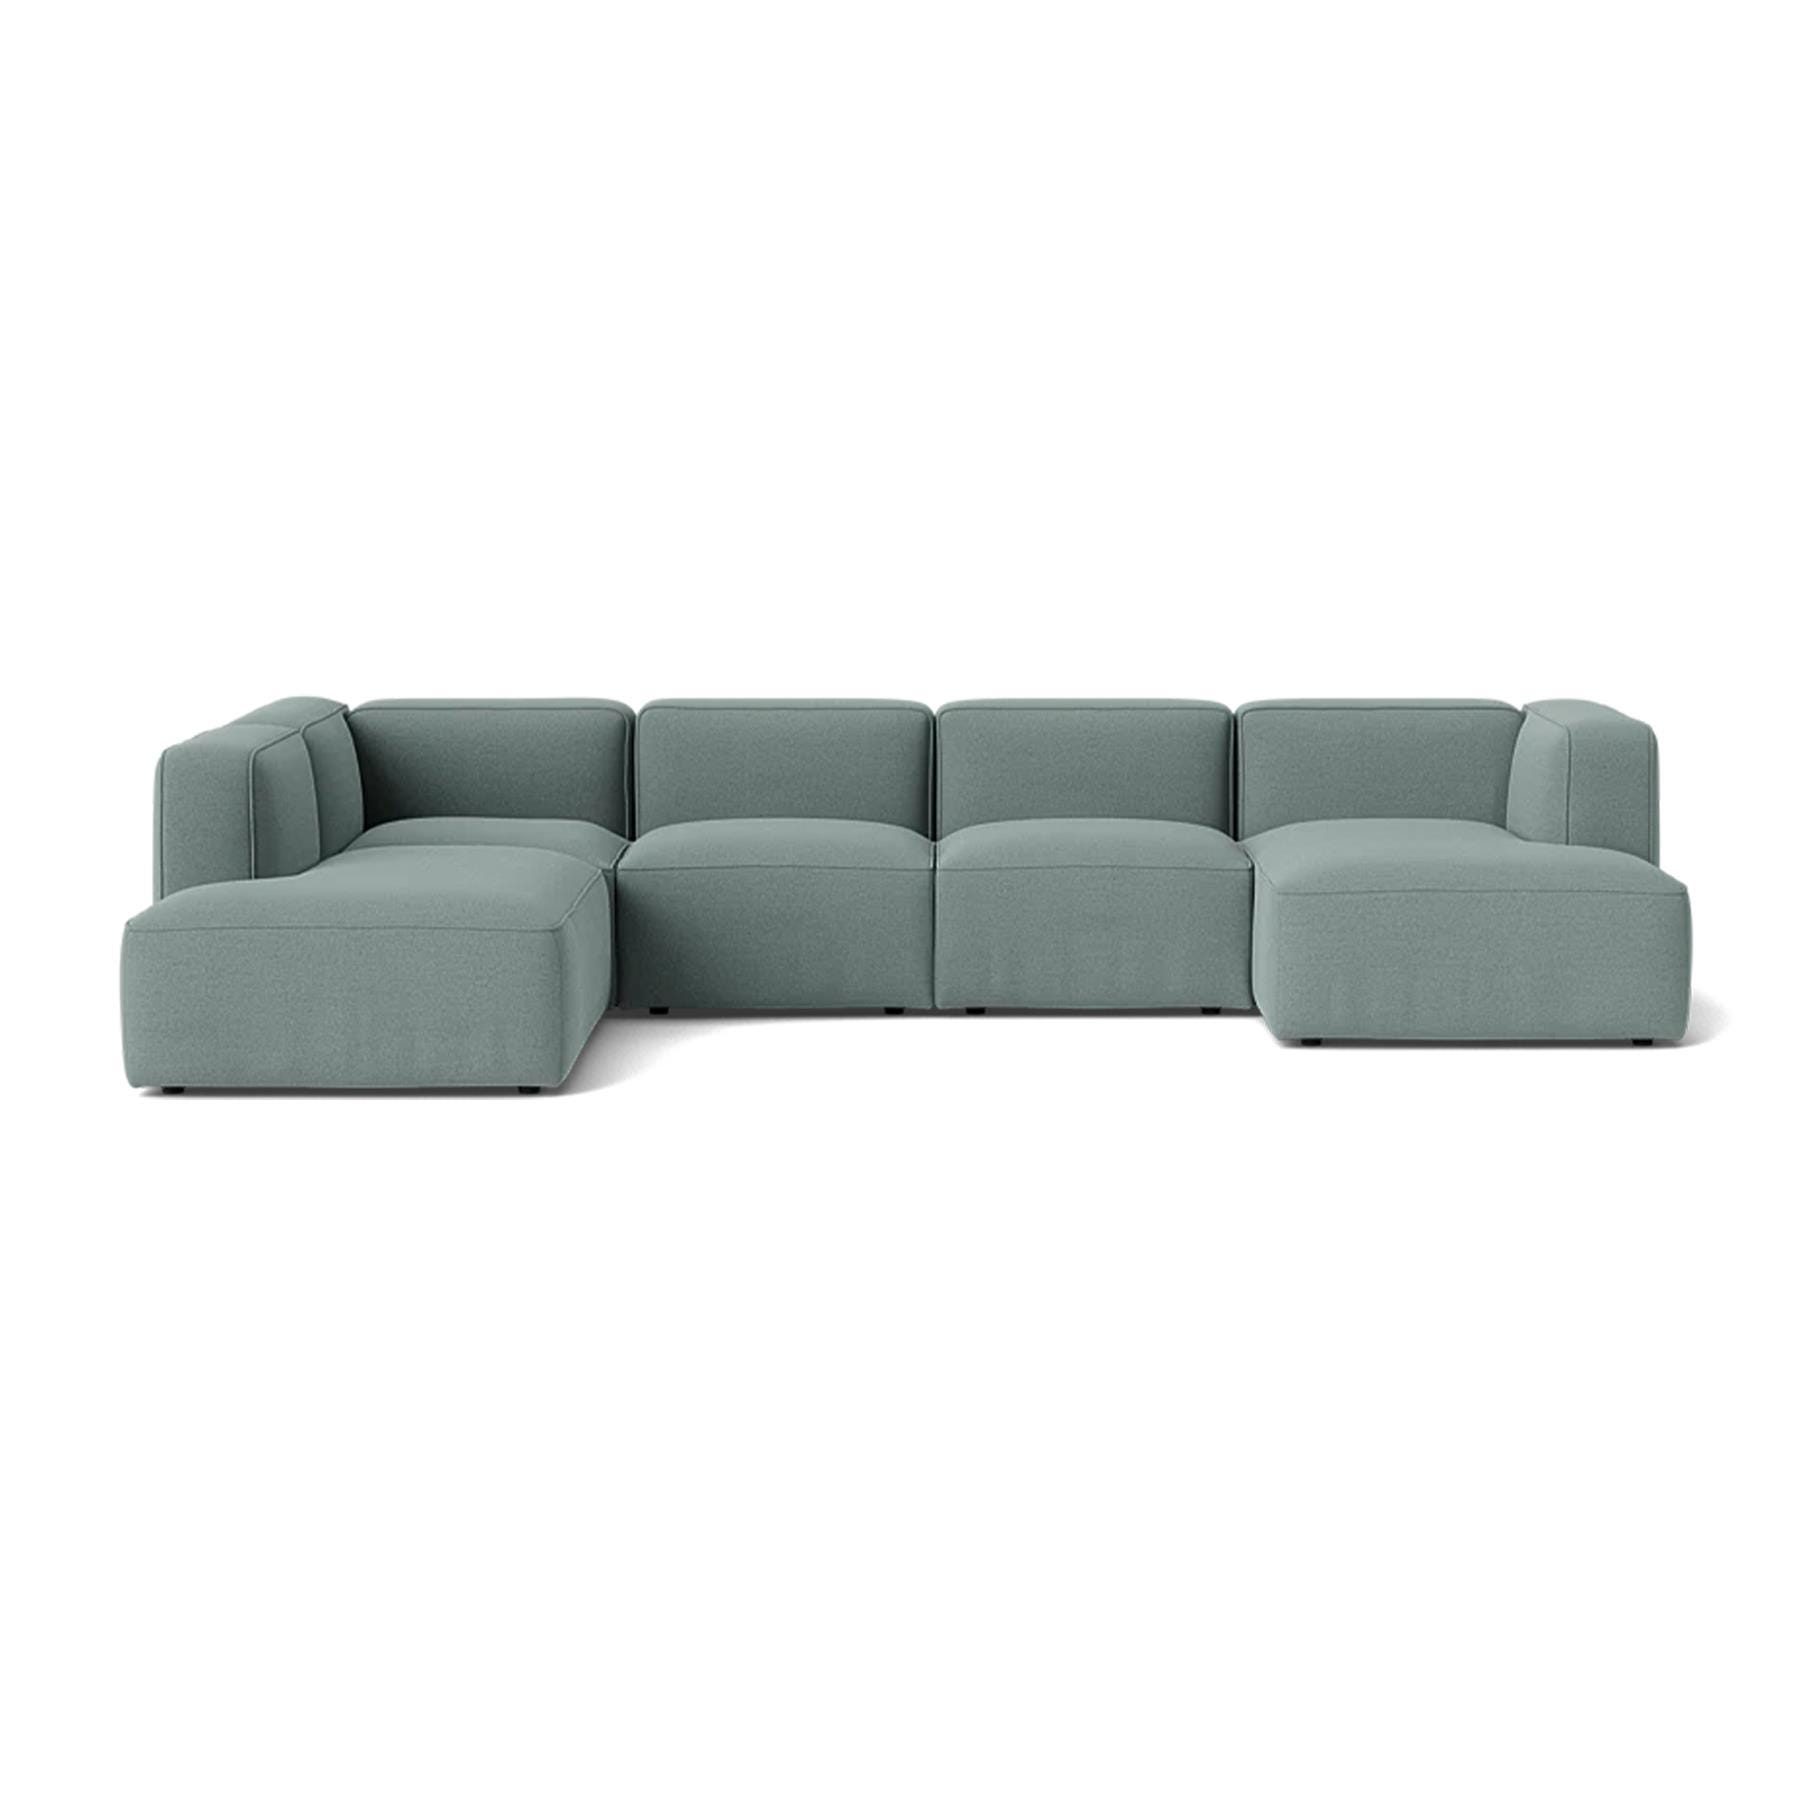 Make Nordic Basecamp Family Sofa Rewool 868 Right Green Designer Furniture From Holloways Of Ludlow